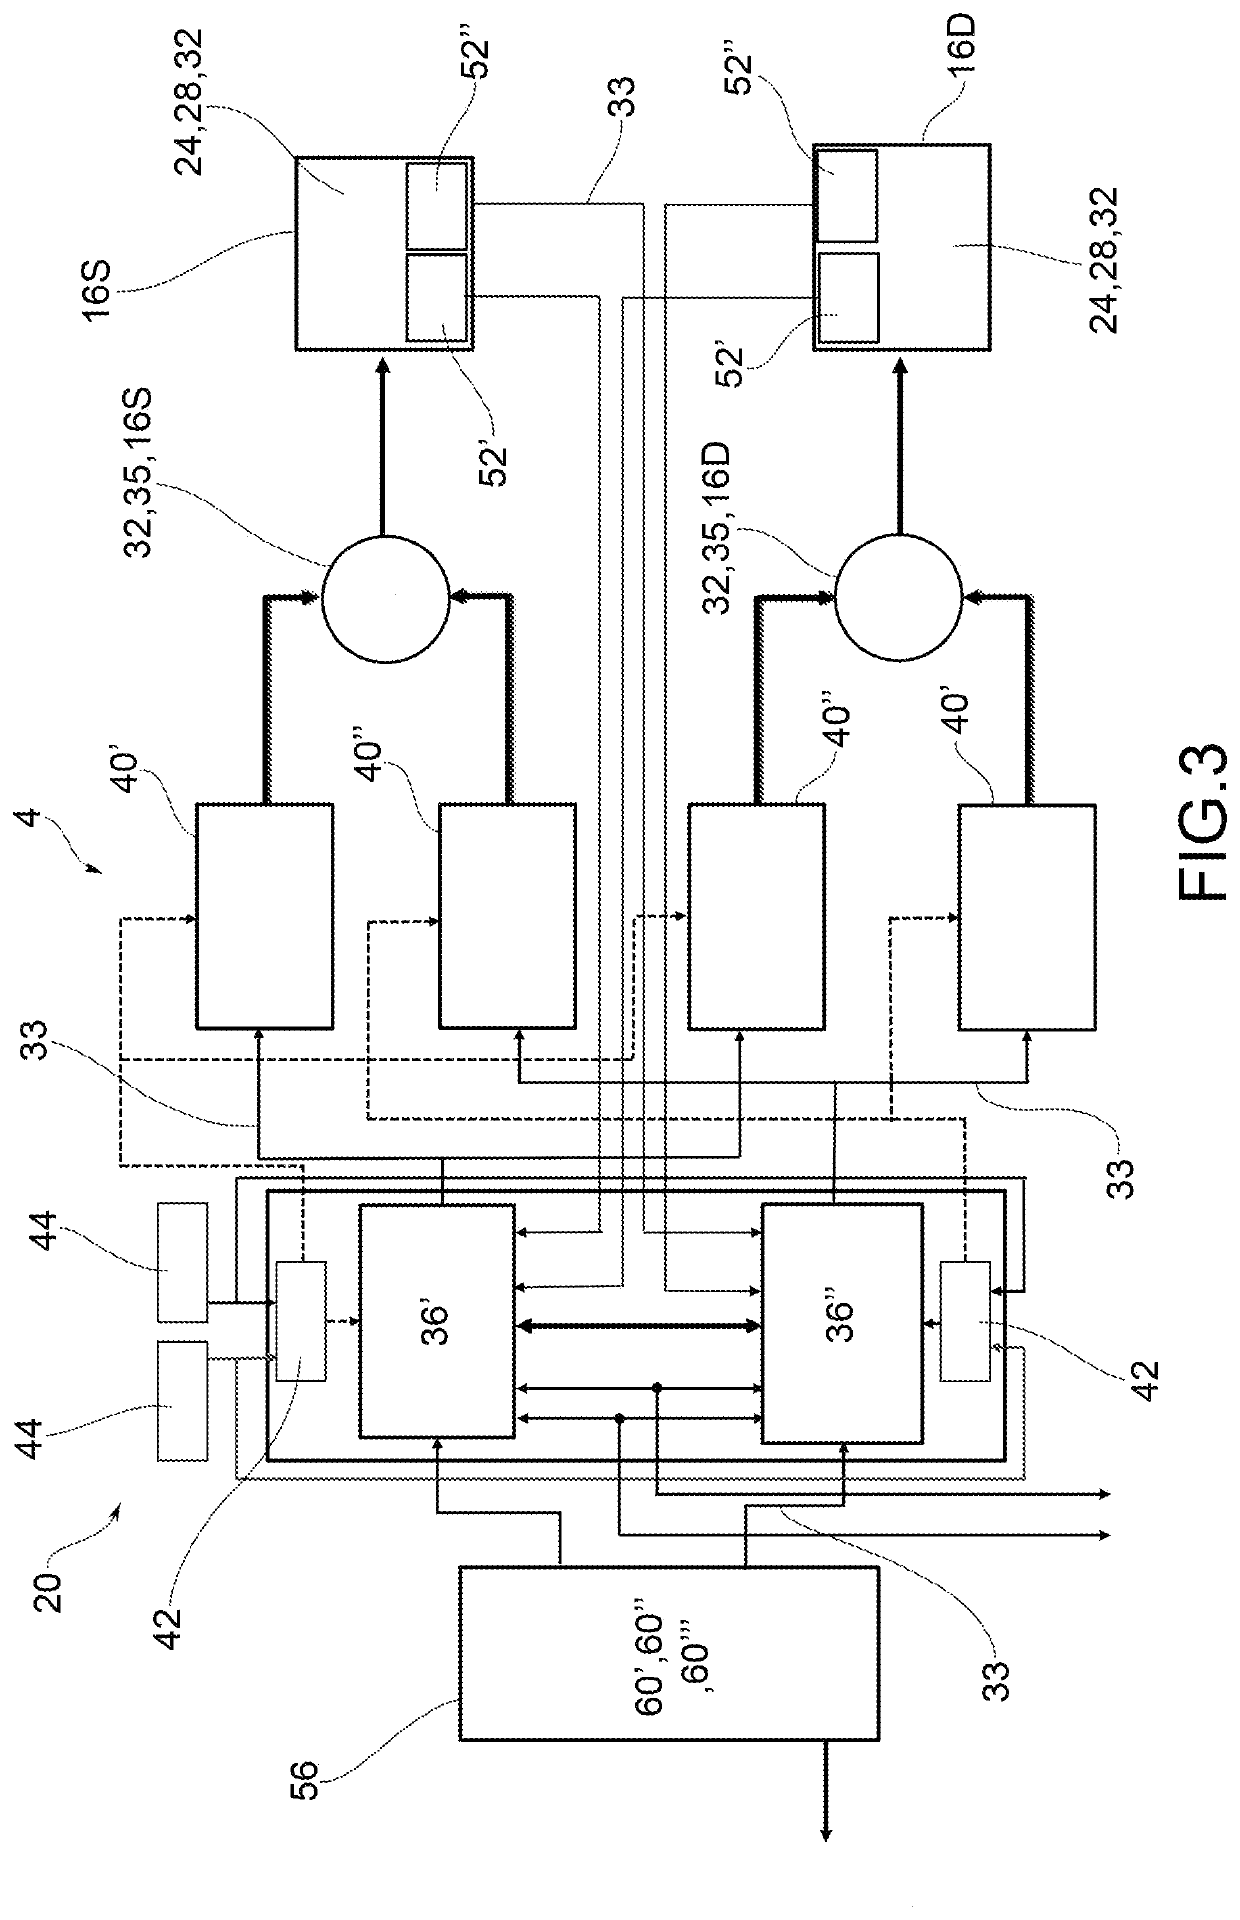 Brake by wire braking system for vehicles, provided with electric actuation and electric back-up